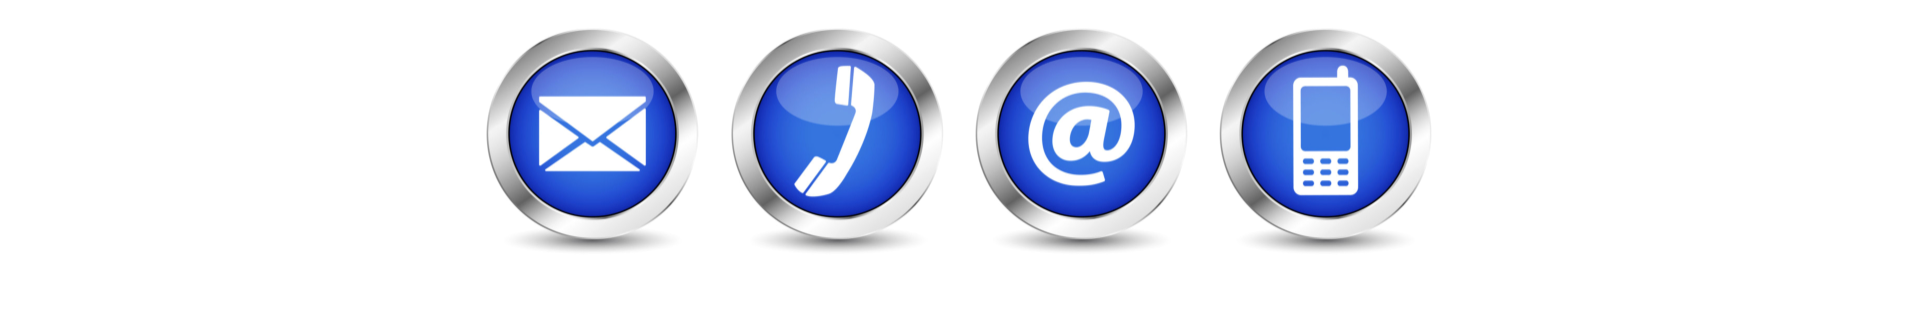 contact us web buttons set with email